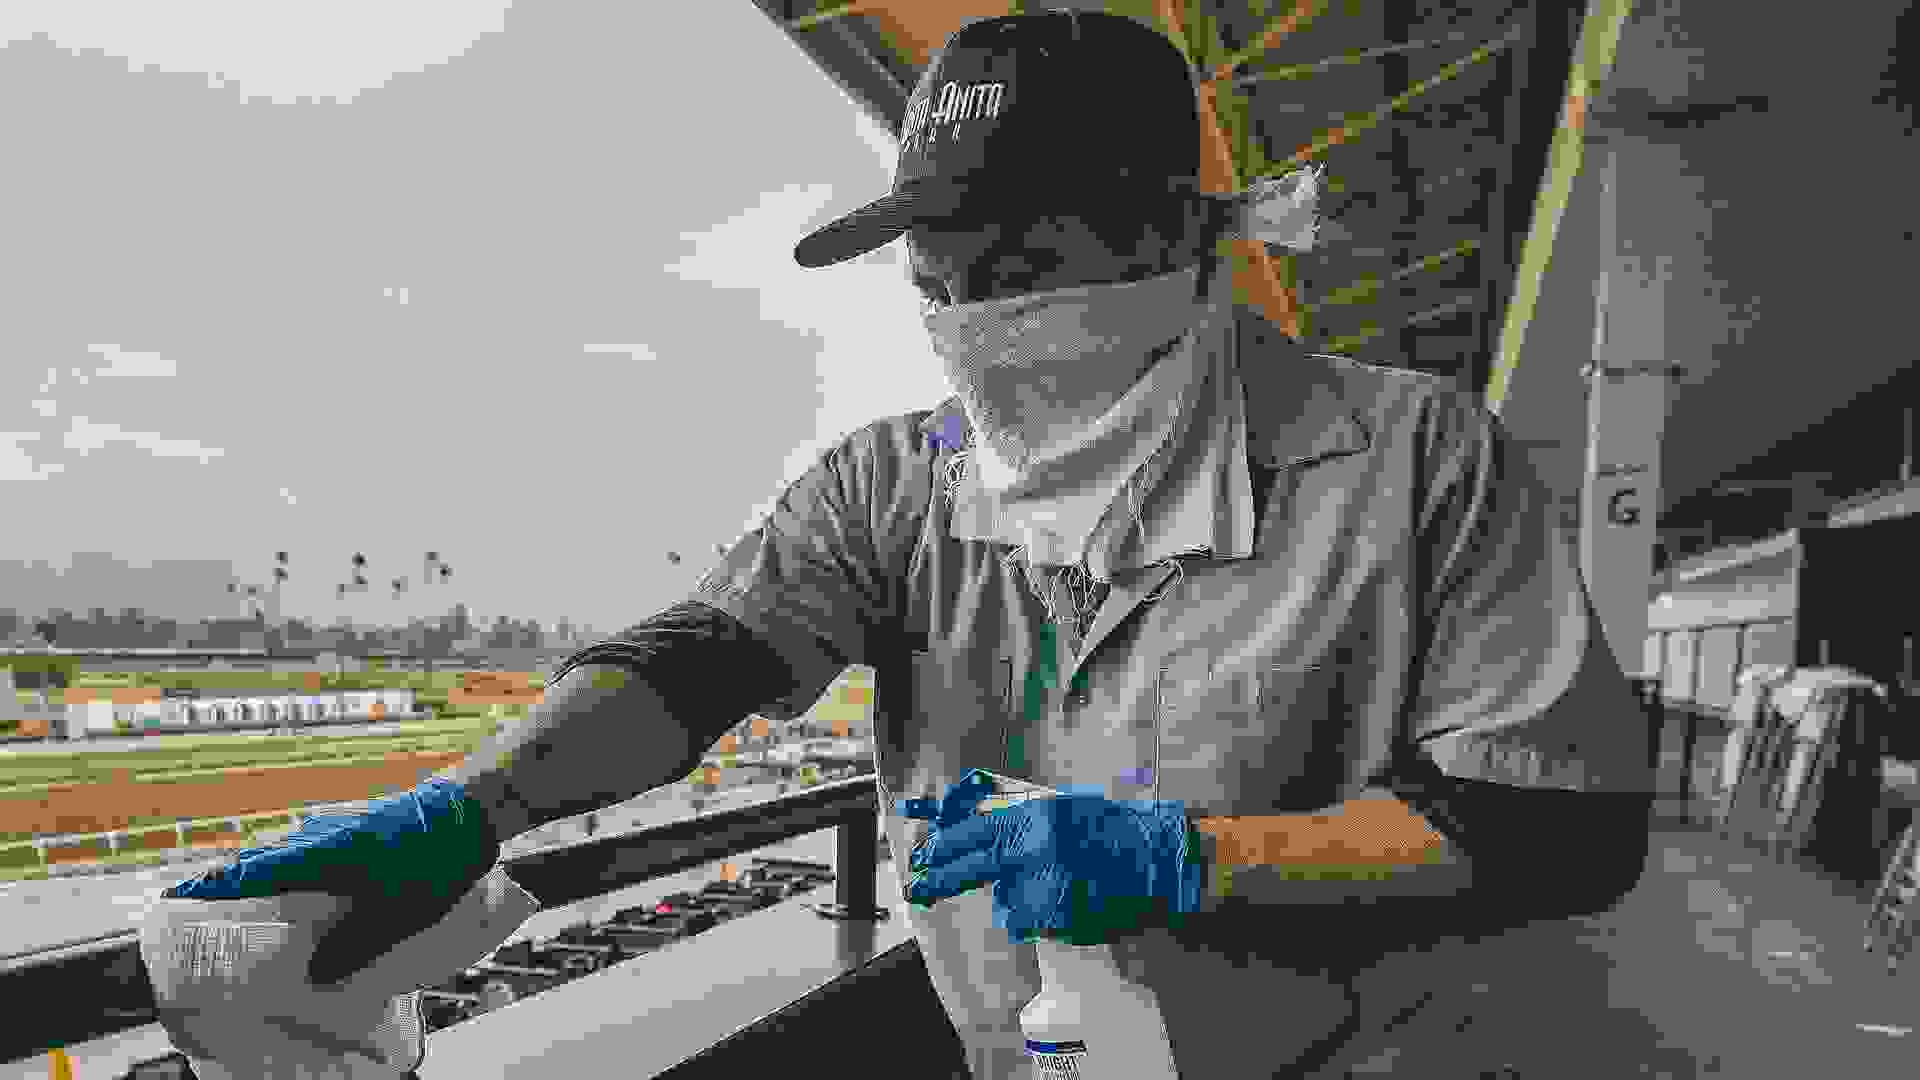 An unidentified worker sanitizes the grandstand handrails despite being closed to the public for safety concerns over the coronavirus in Arcadia, California on Evers/Eclipse Sportswire/CSMHorse Racing Horse Racing continues despite COVID19, Arcadia, USA - 14 Mar 2020.